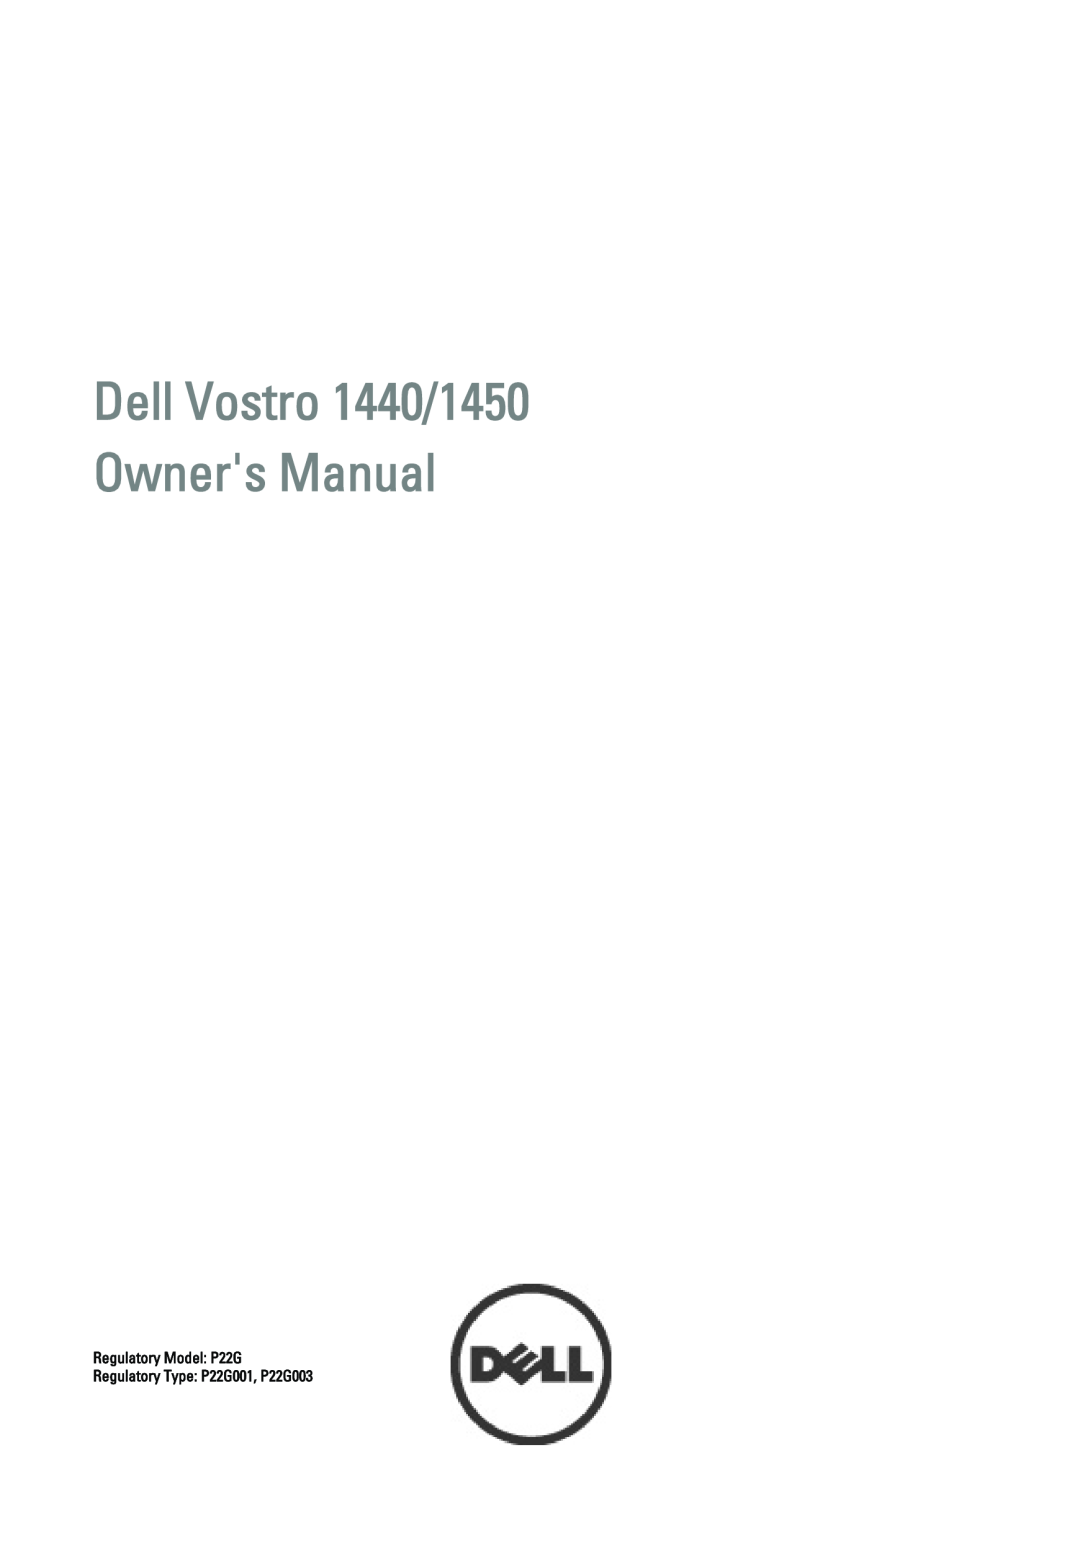 Dell owner manual Dell Vostro 1440/1450 Owners Manual, Regulatory Model P22G Regulatory Type P22G001, P22G003 